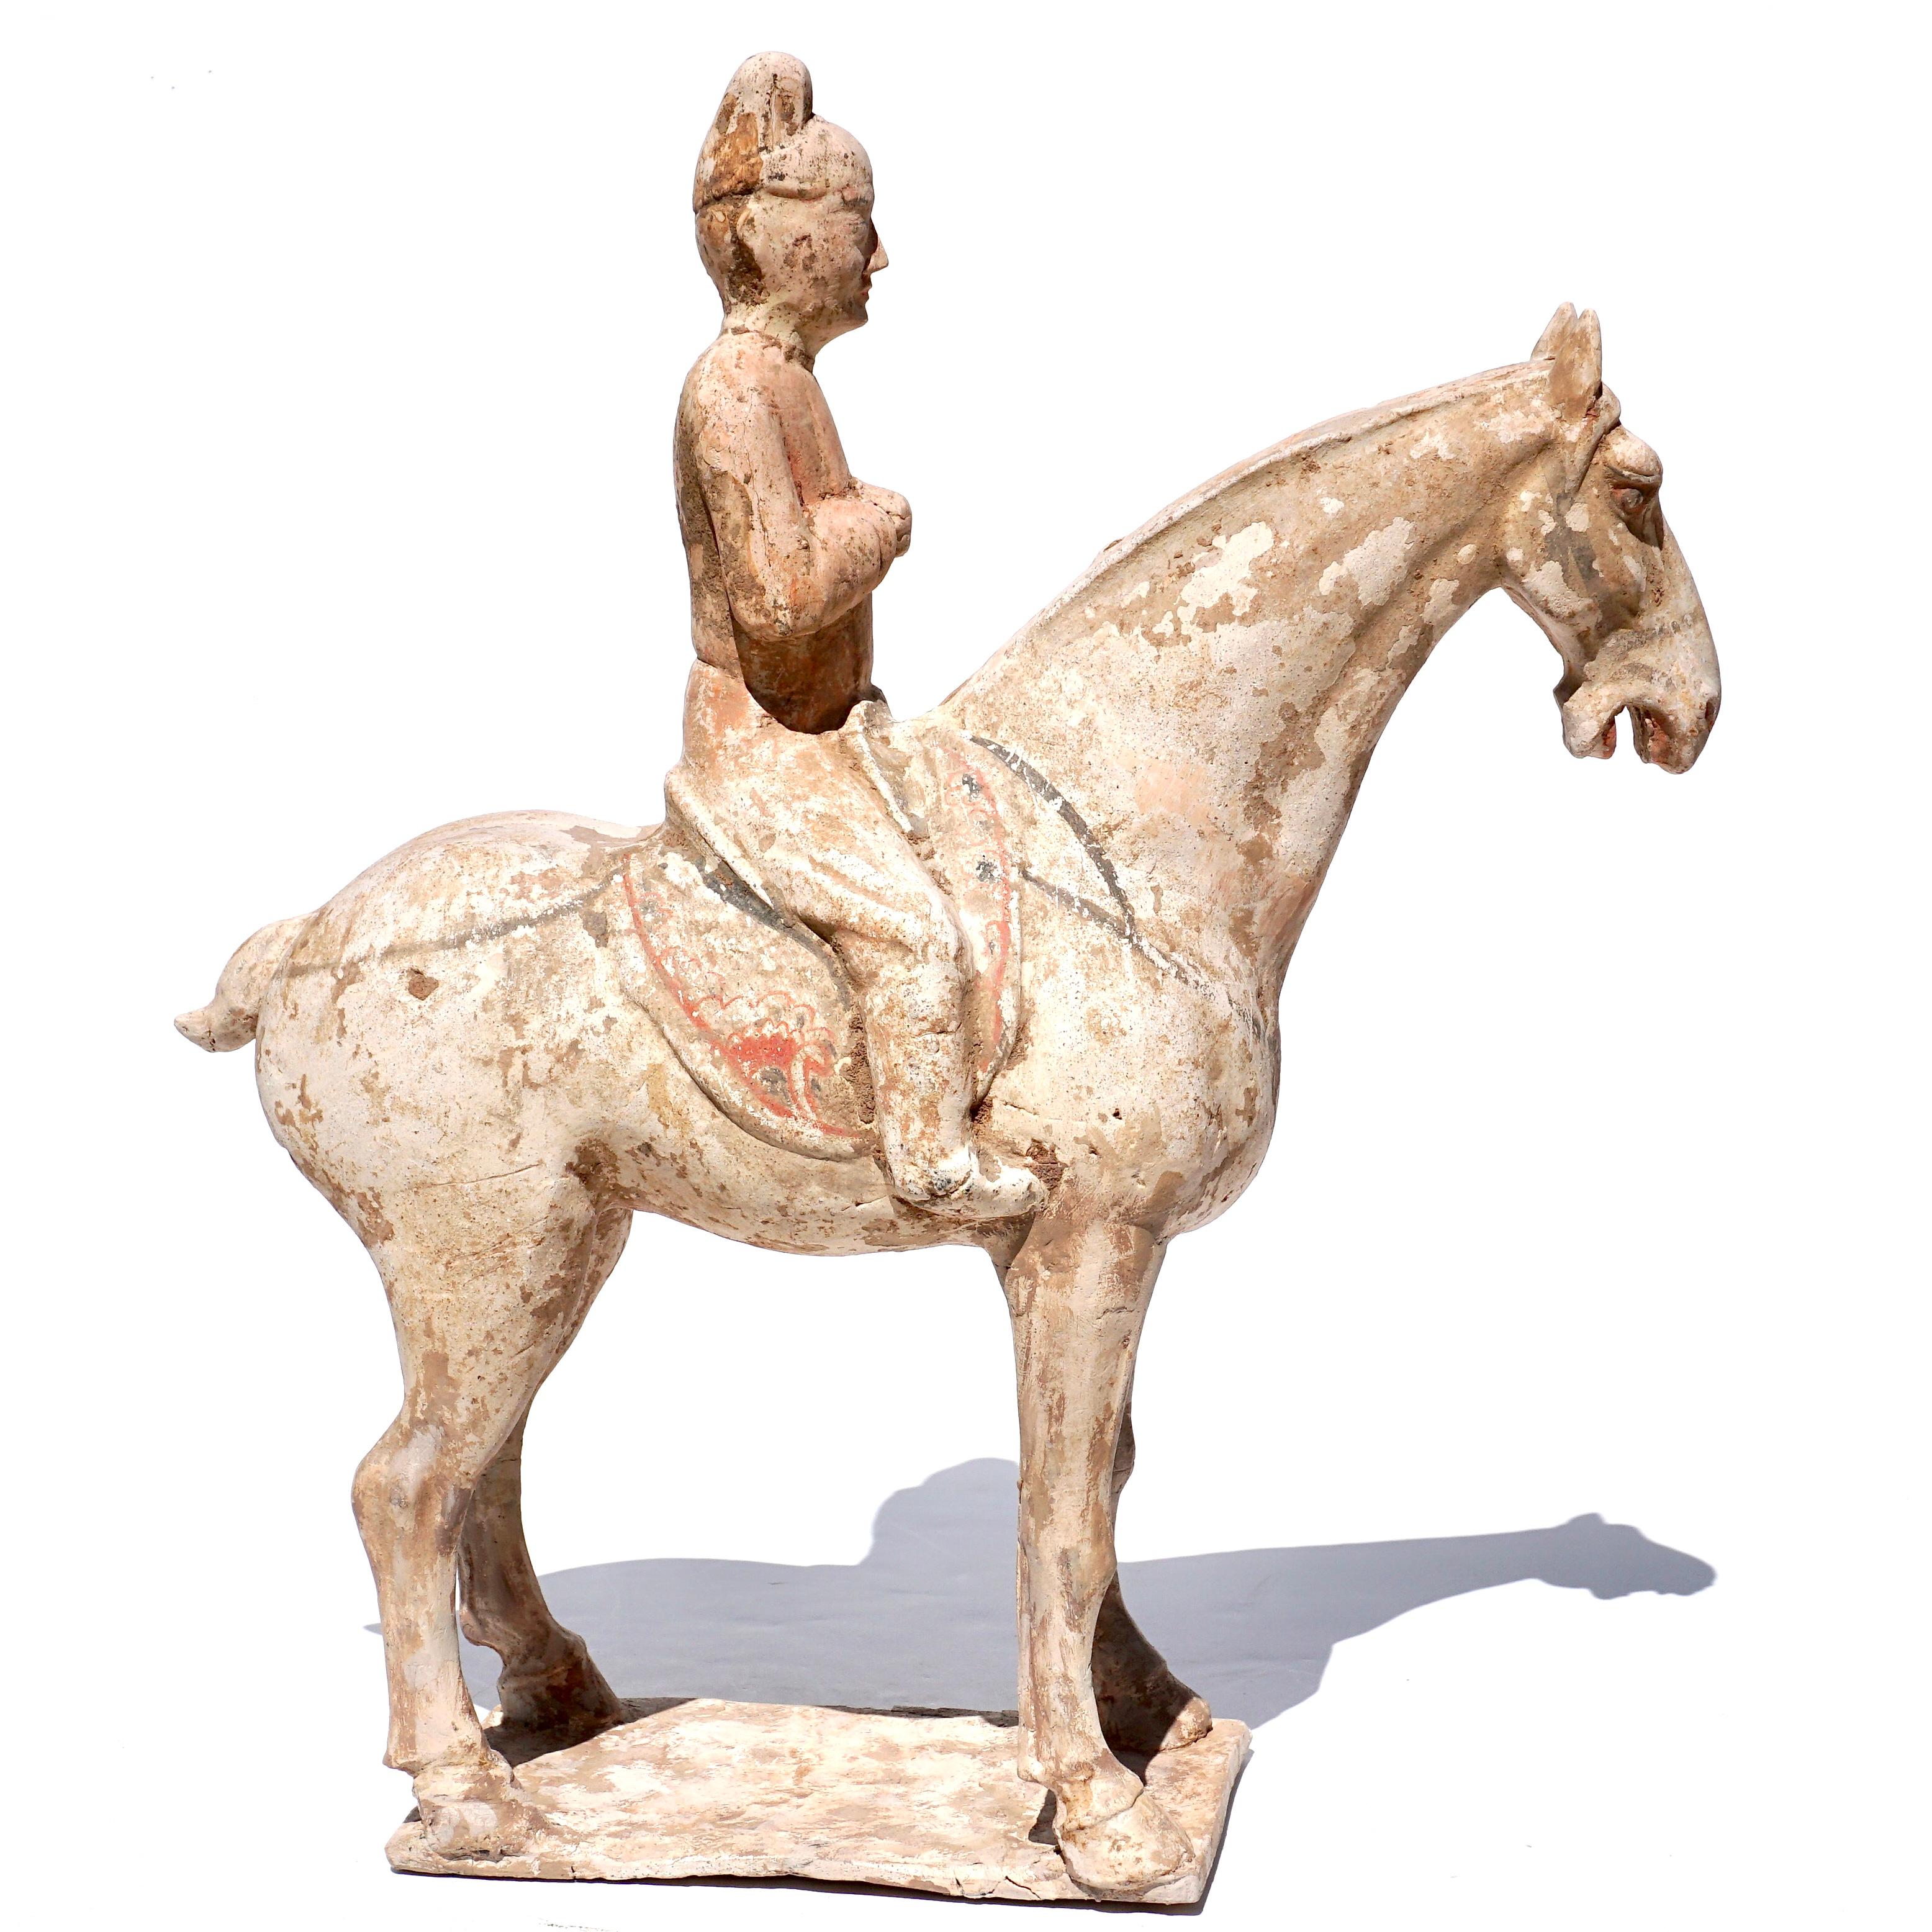 Tang Dynasty Horse and Rider. China (618-907 AD)

During the Tang Dynasty, horses were revered creature, considered relatives of the mythical dragon. This veneration was well earned, for the speed and stamina of these majestic animals ensured the